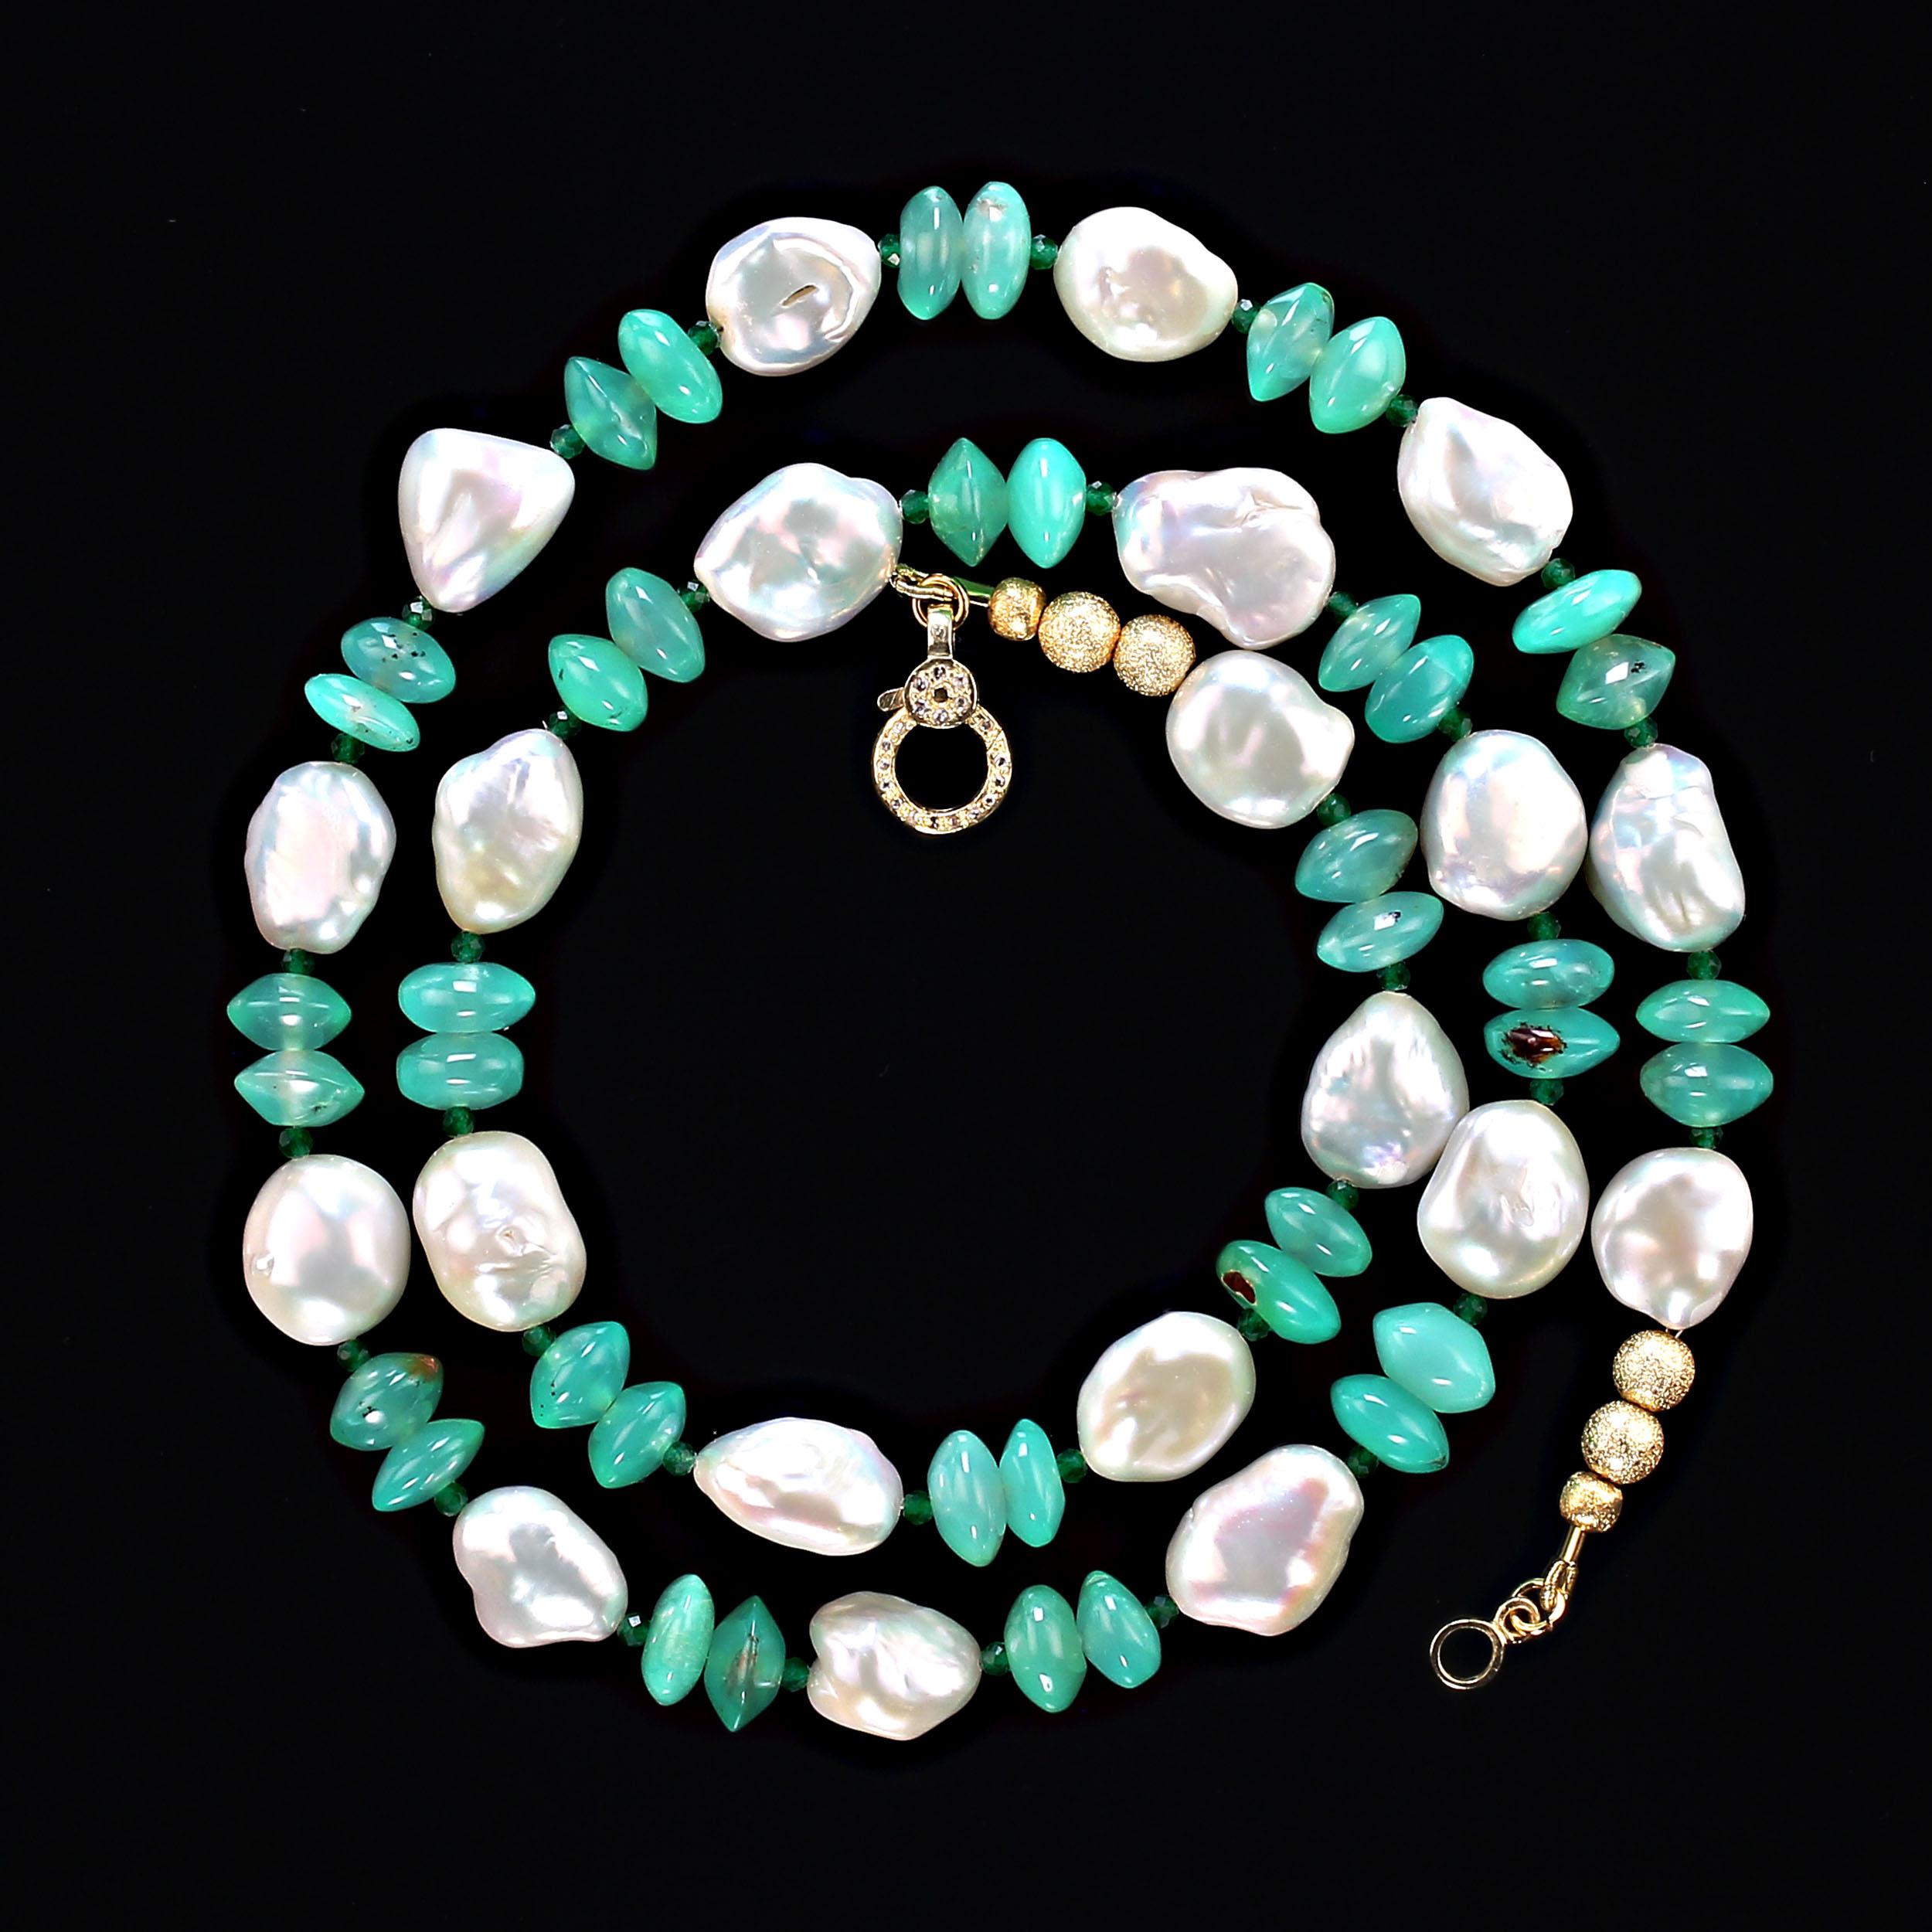 24 Inch white iridescent keshi pearl and green glowing chrysoprase necklace.  This glorious necklace combines the best of both pearl and gemstone.  The translucent green chrysoprase is accented with green 2mm green quartz rondelles. The necklace is